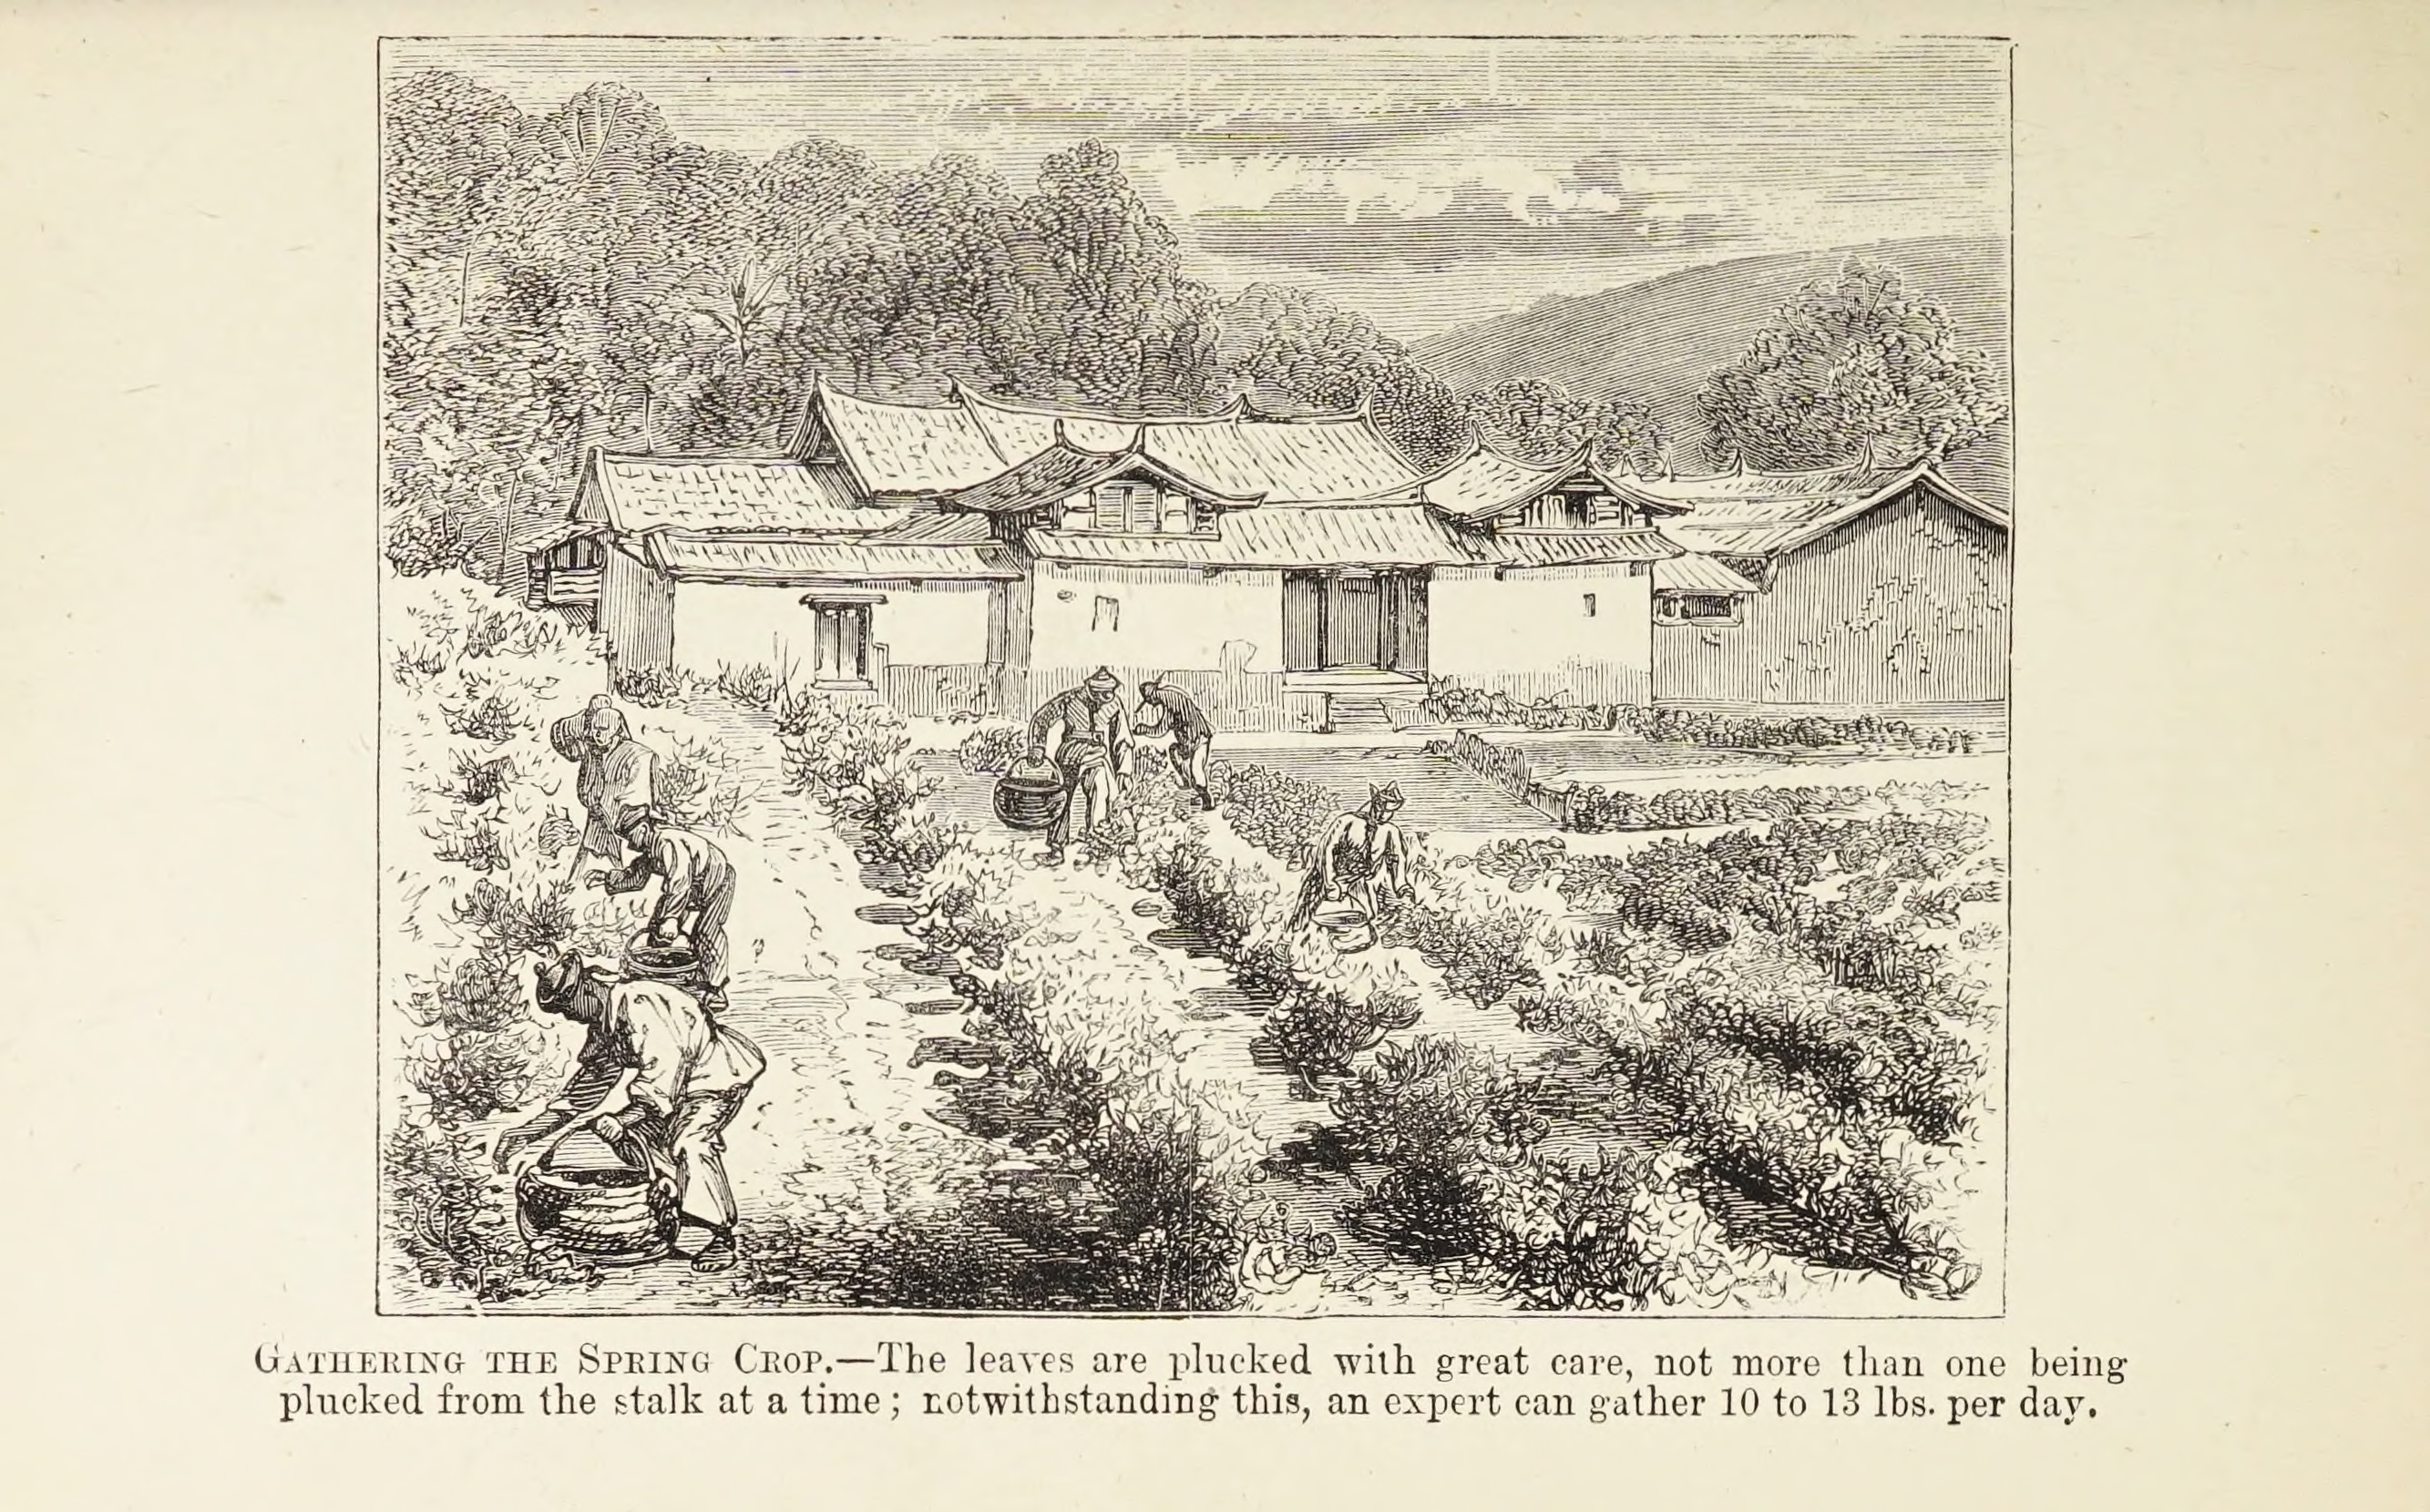 Figure 7: Artist unknown, “Gathering the Spring Crop,” Tea: Its History and Mystery, London, Simpkin, Marshall & Co., 1878. Getty Research Institute, Los Angeles (91-B14823).